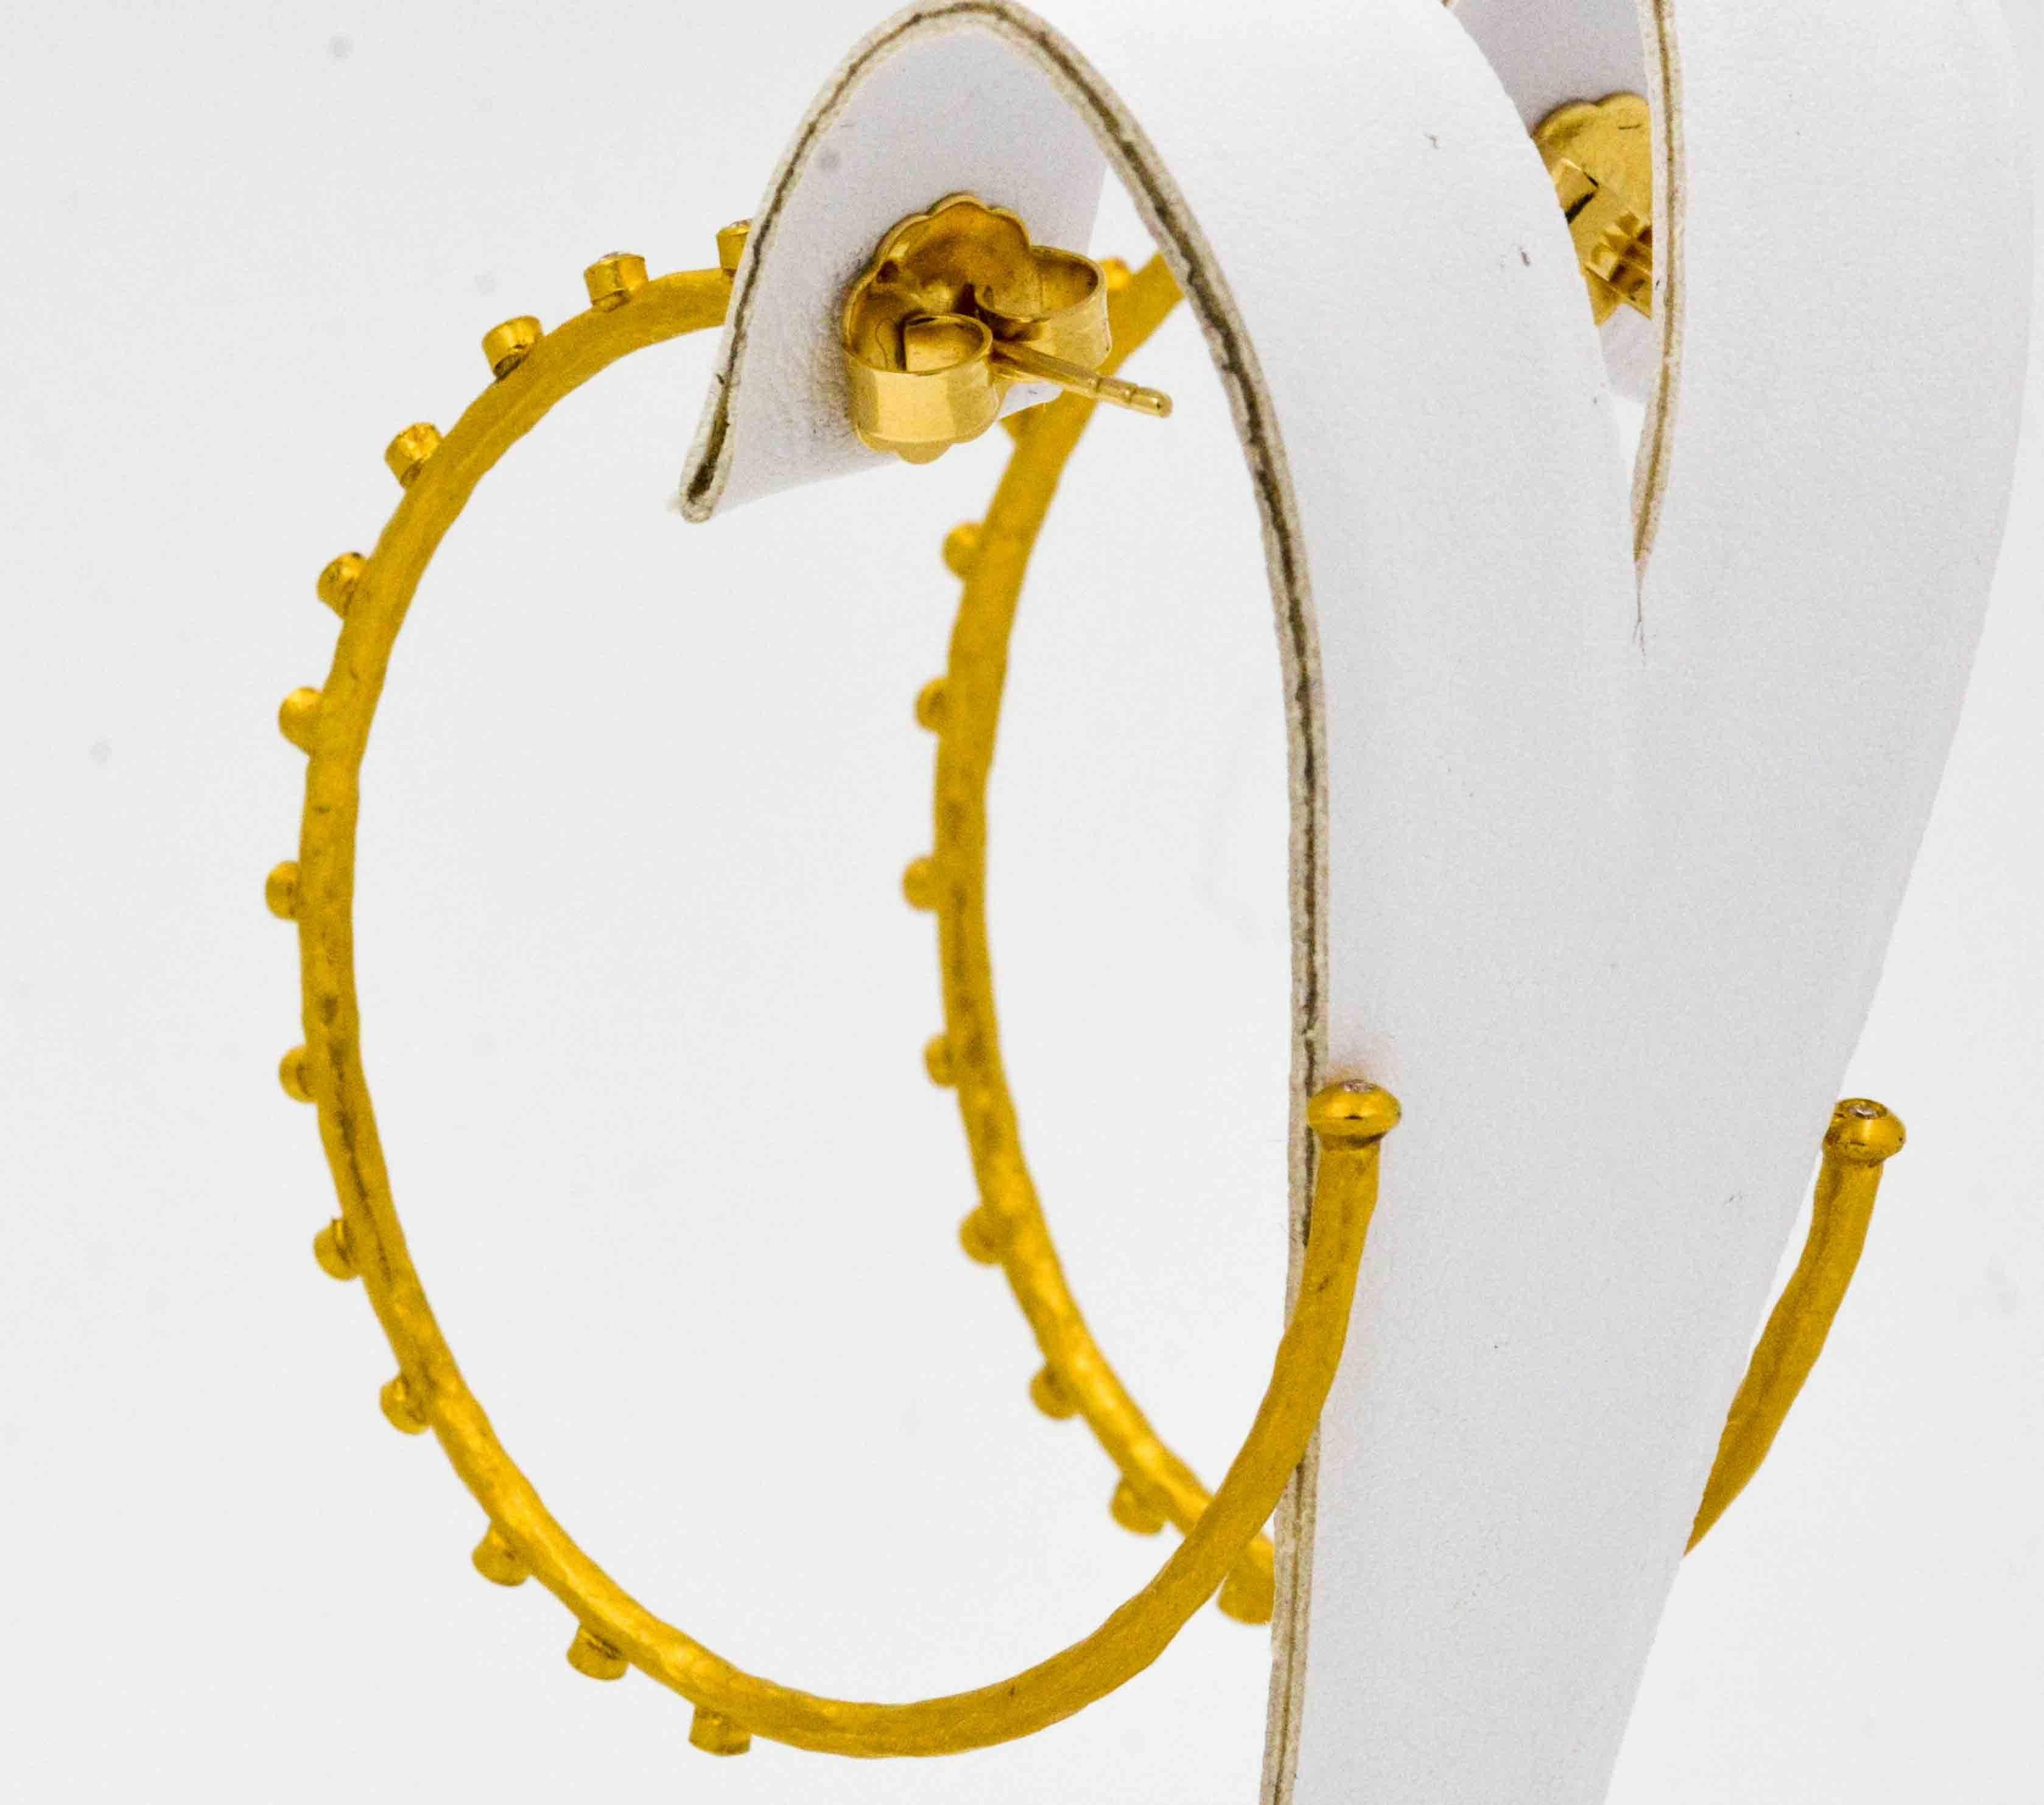 Scintillating sparkles of light come from 0.41 ctw diamonds bezel set on these 55 mm 24 karat yellow gold hoop earrings. She will never tire of wearing these extraordinary hoop earrings with 18 kt yellow gold posts and 22 kt yellow gold backings.